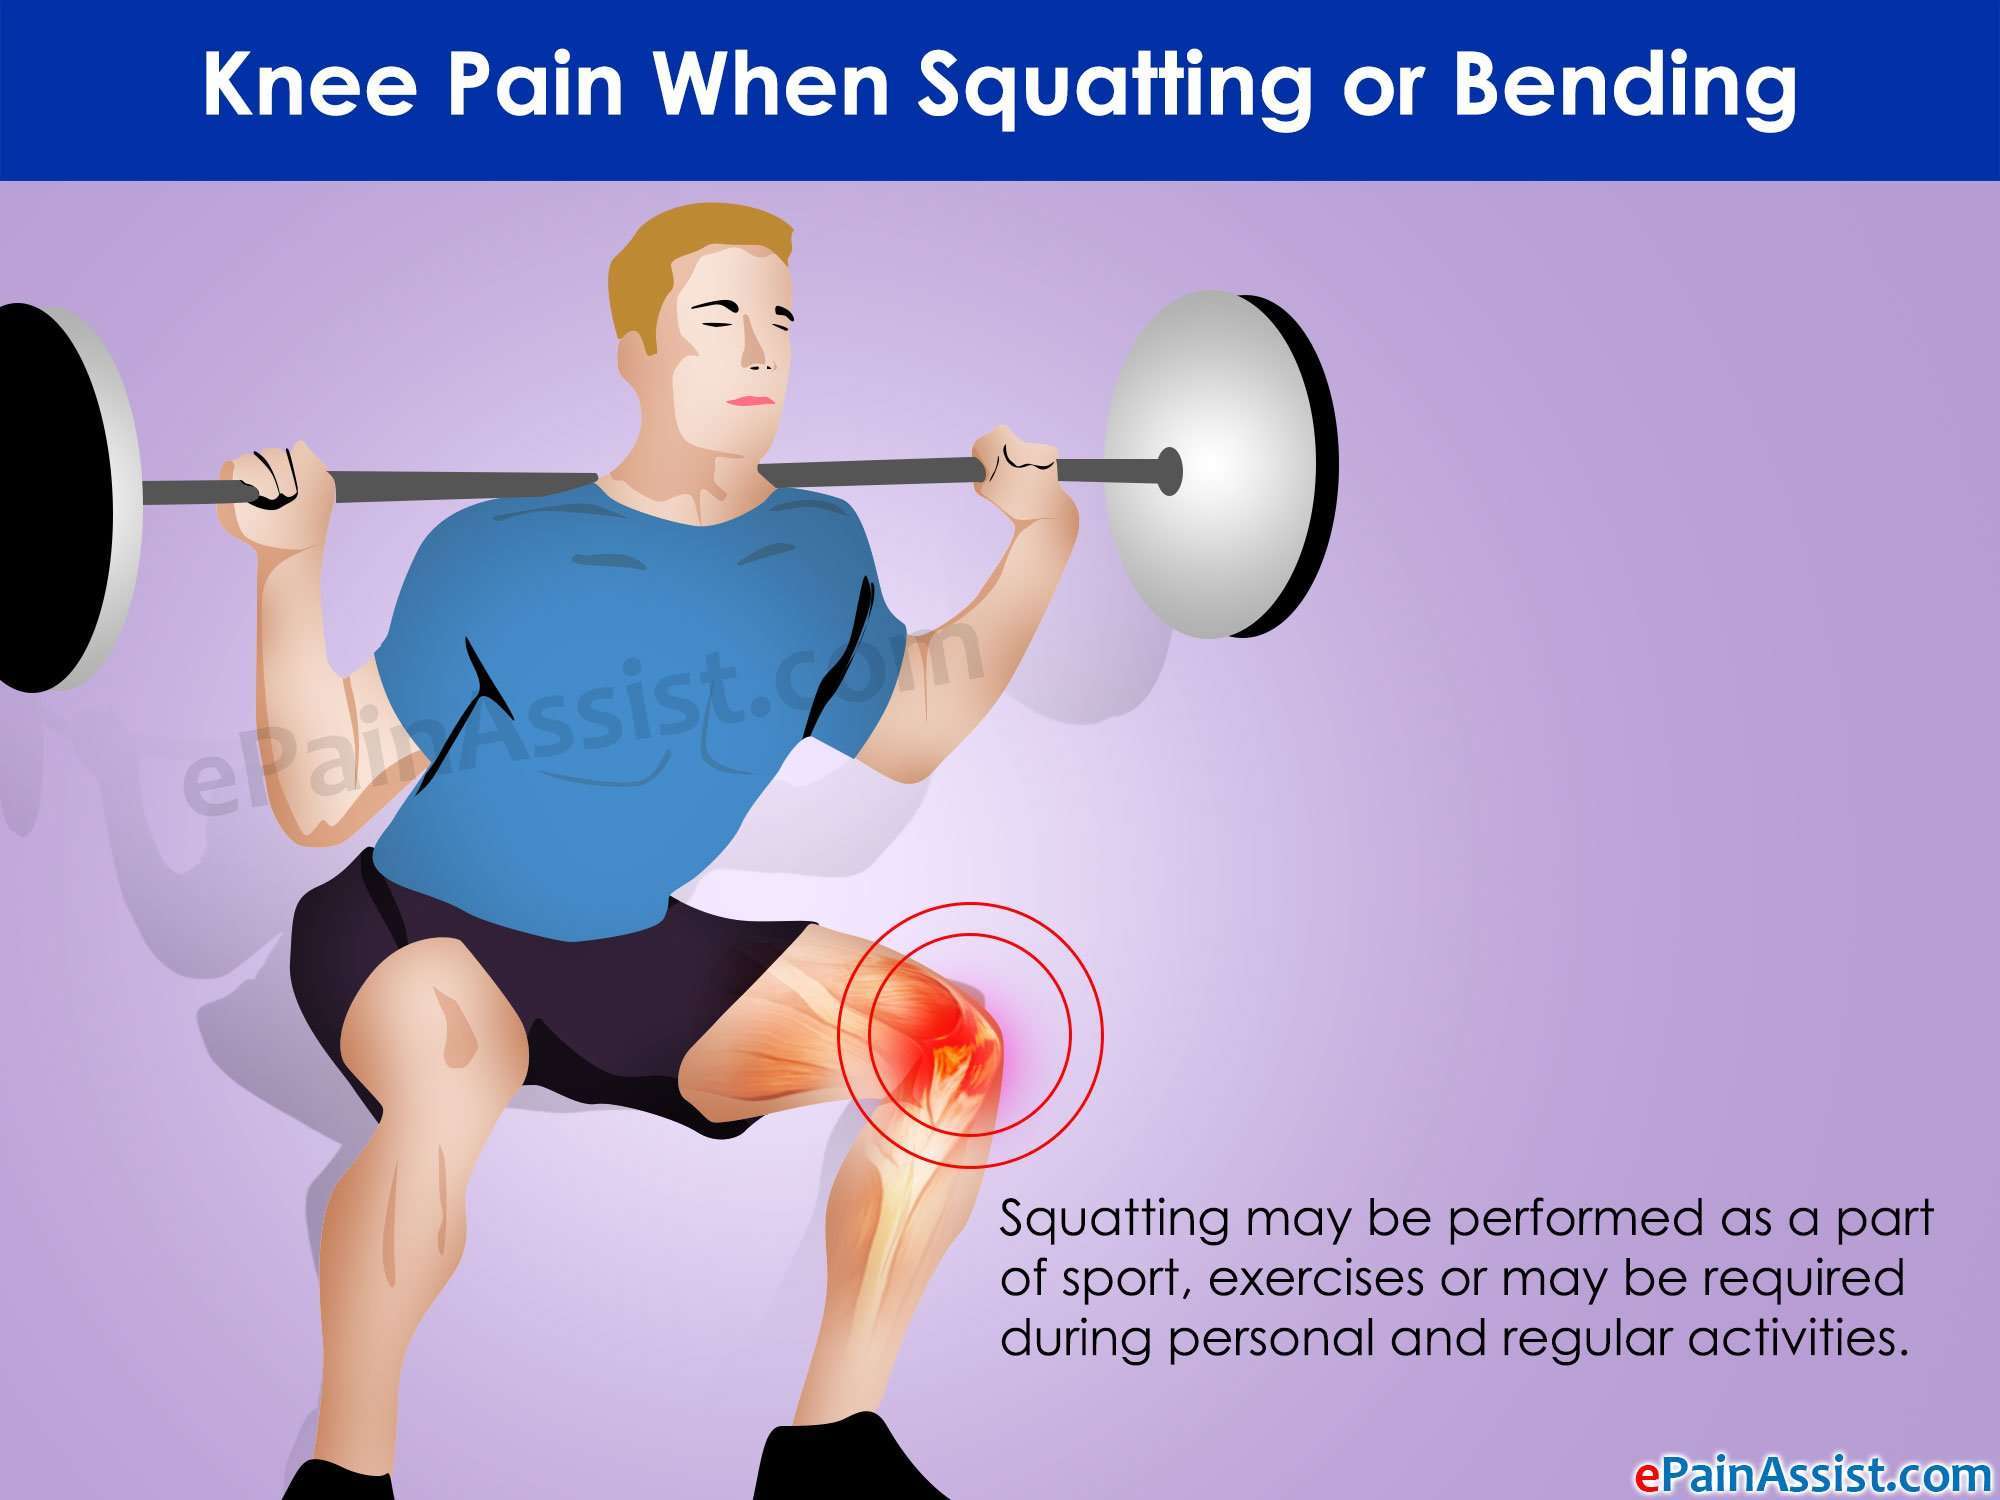 What Causes Knee Pain When Squatting or Bending?